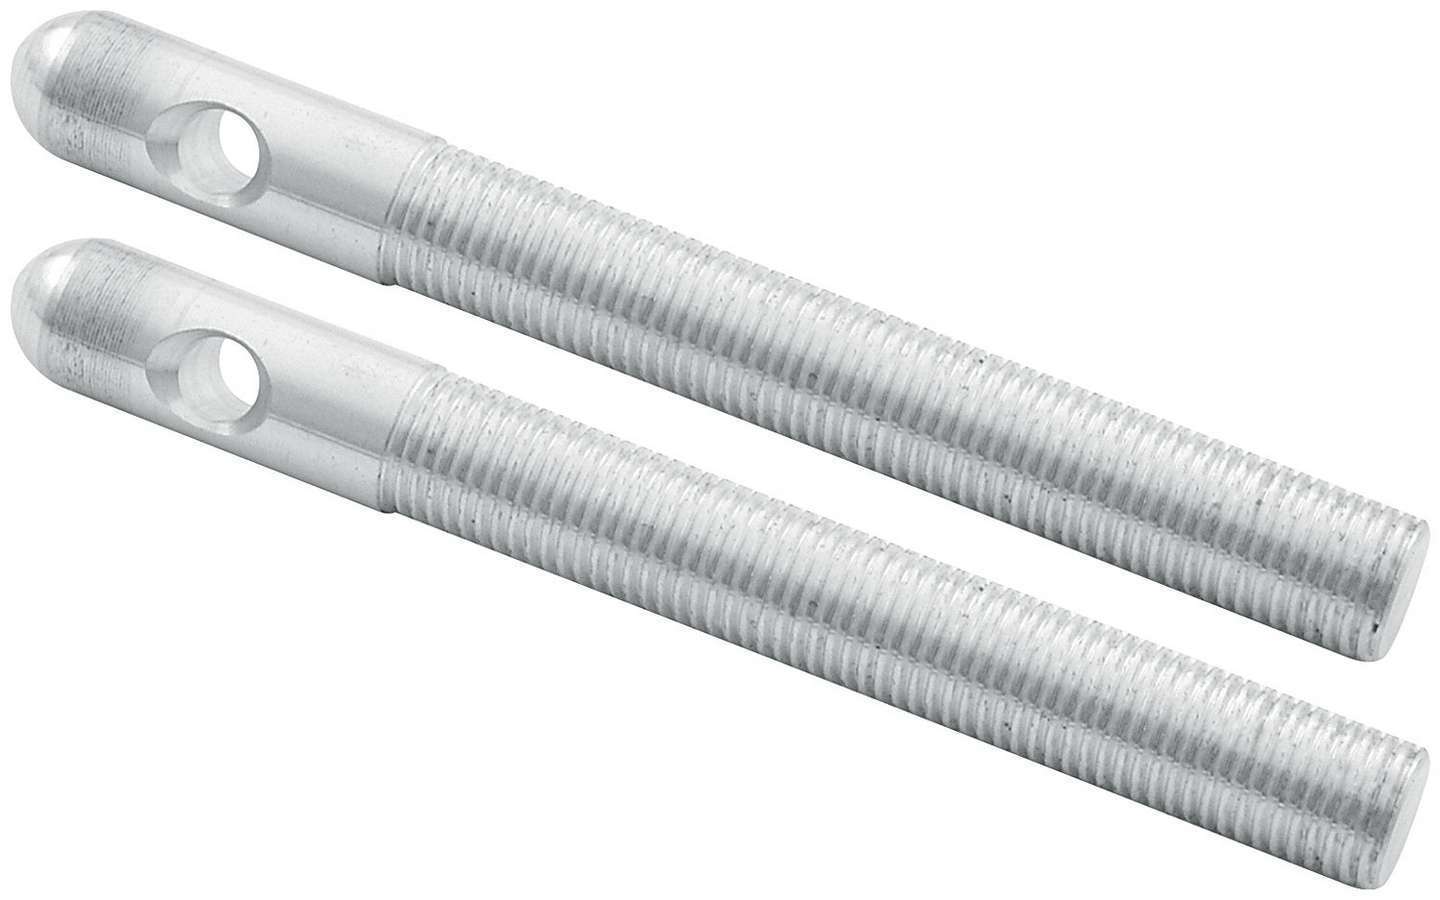 Allstar Performance 18487-10 Hood Pin, 3/8 in OD x 3-1/2 in Long, Aluminum, Clear Anodized, Set of 10